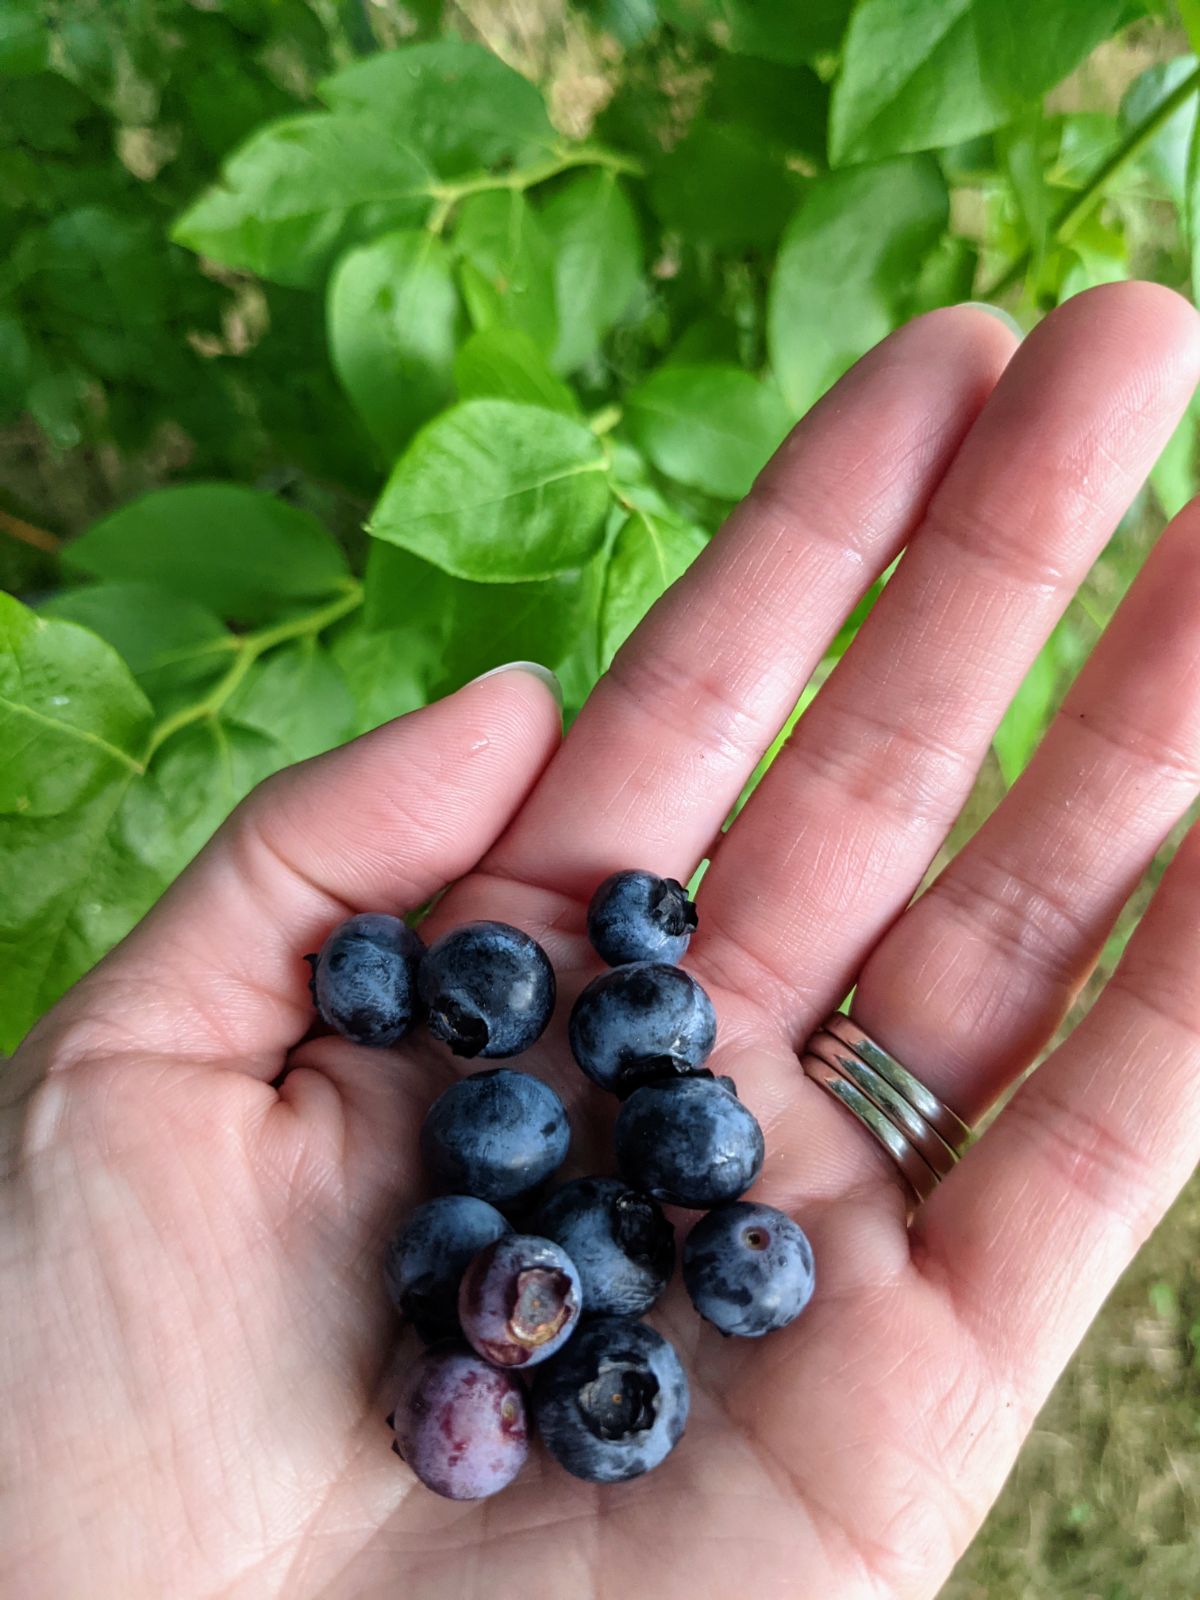 Handful of blueberries from the bushes in our garden in 2022